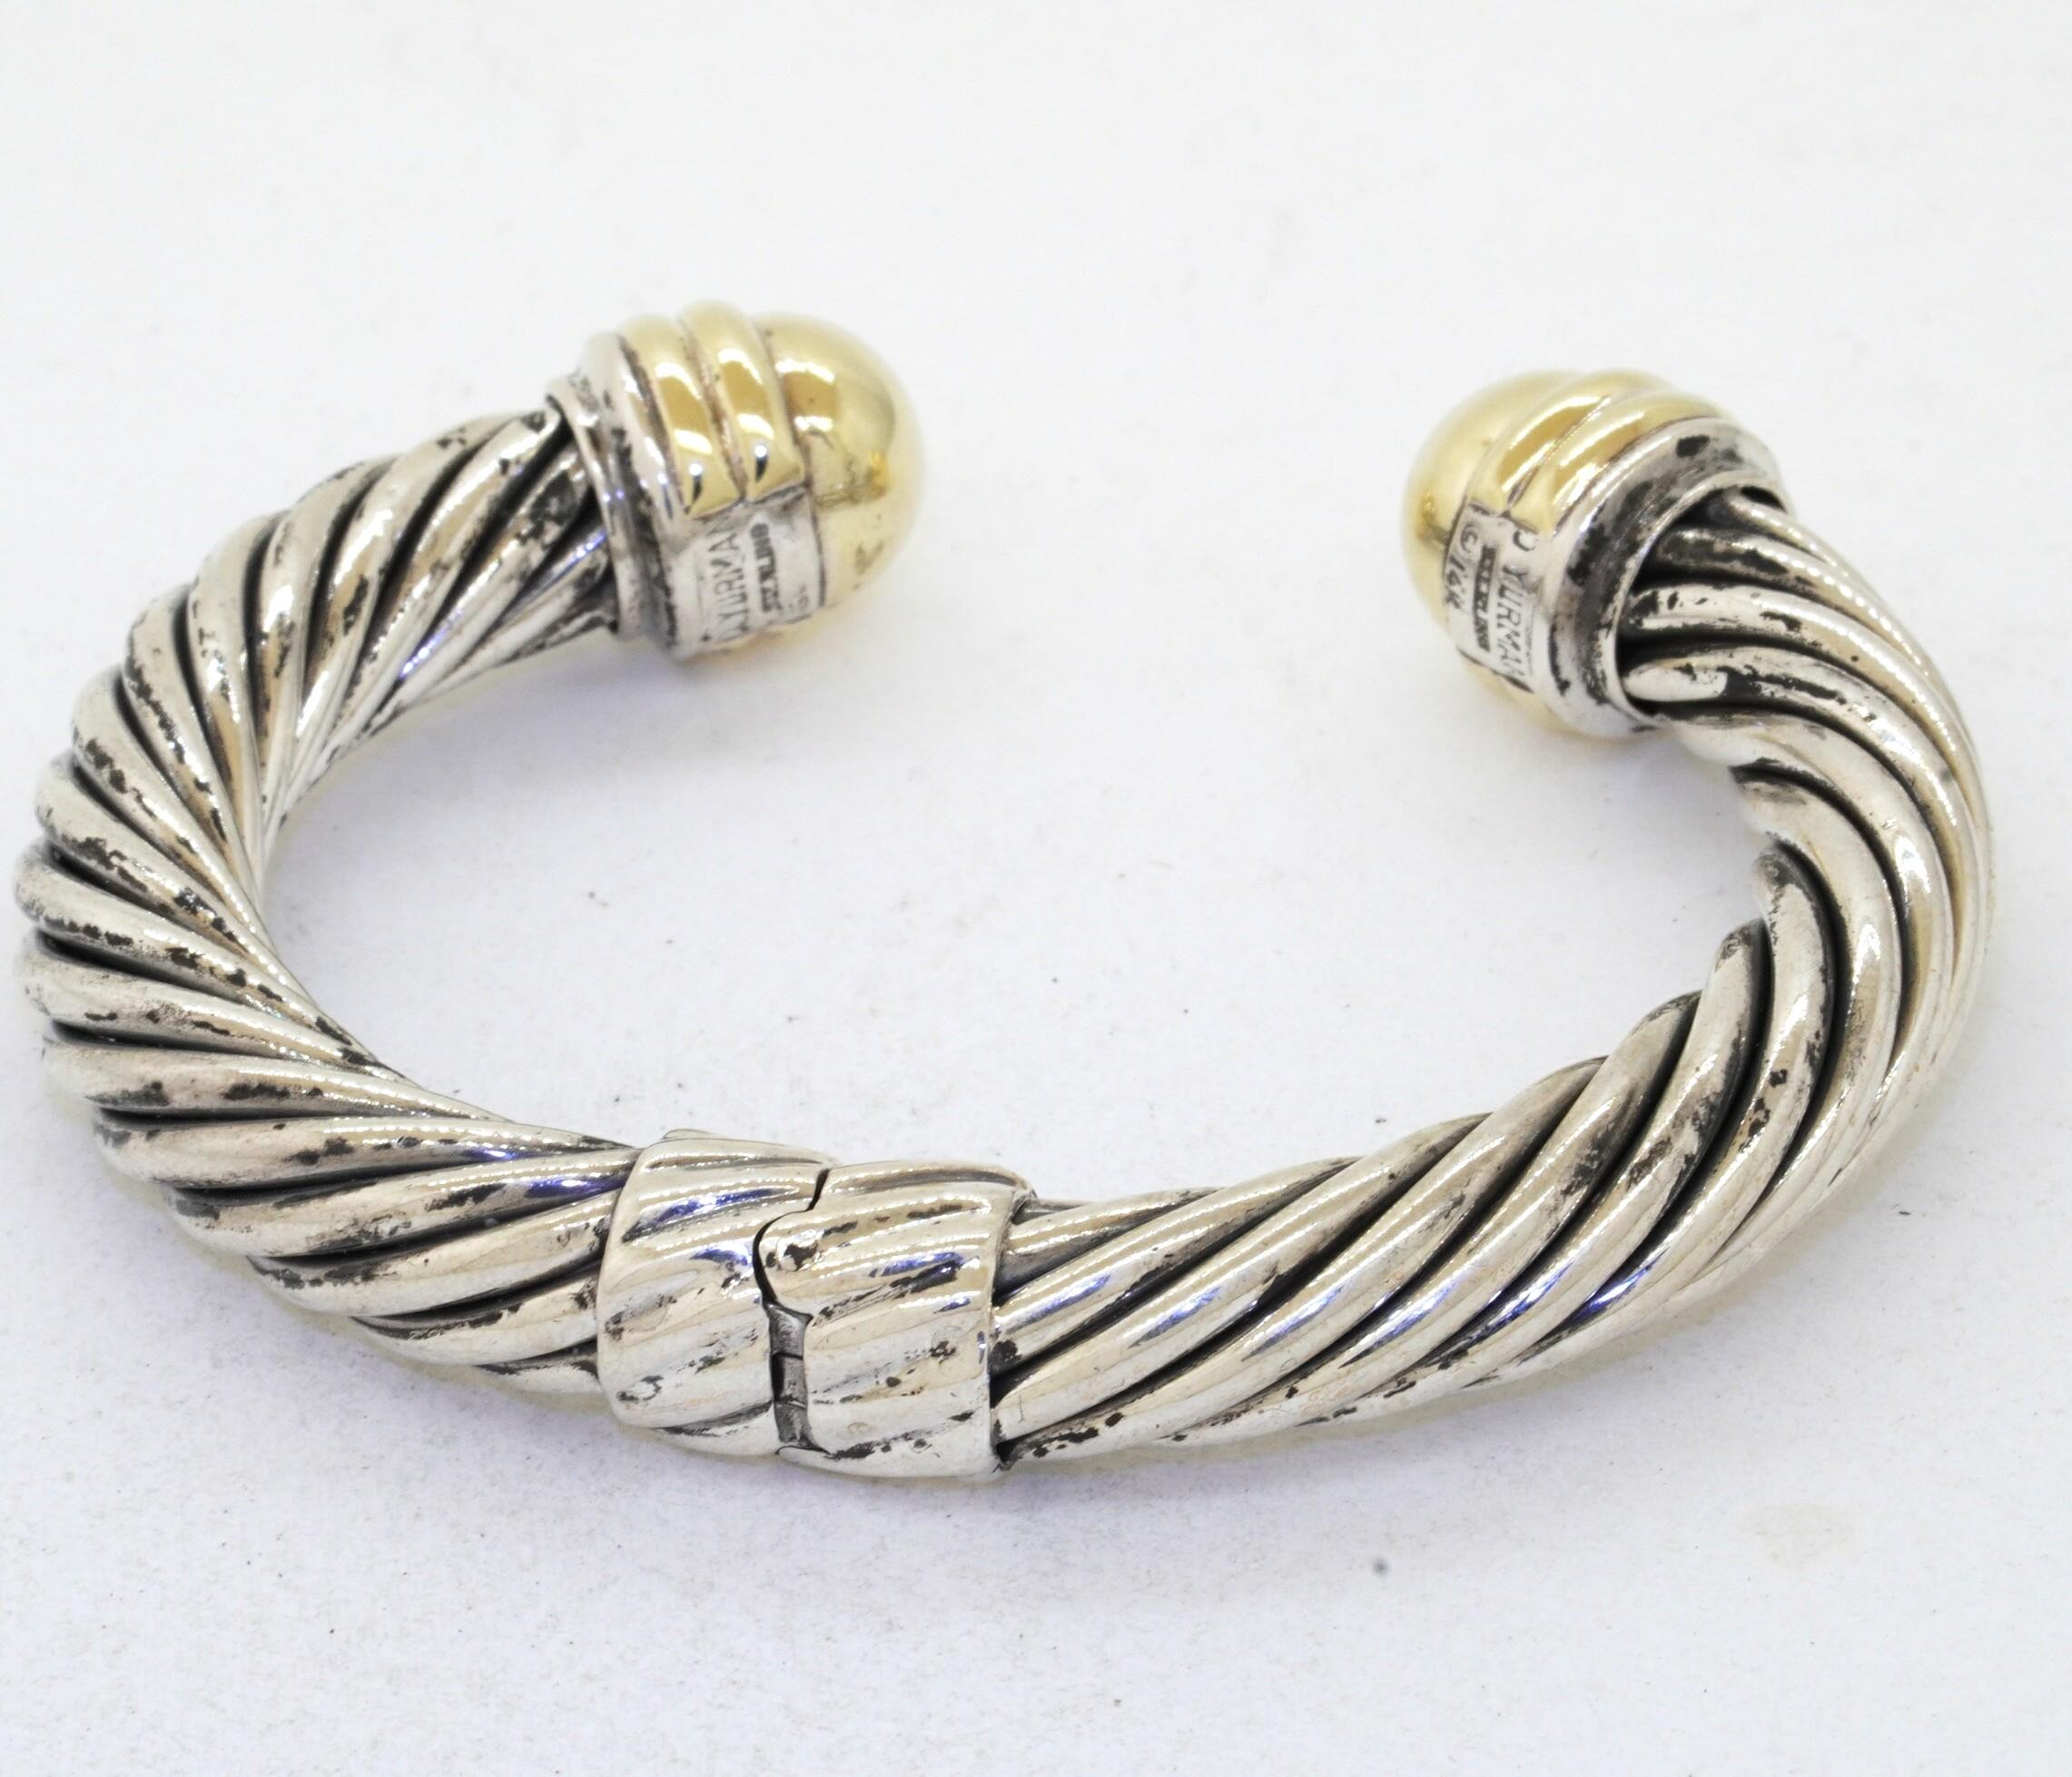 David Yurman heavy 14K YG & 925 Sterling silver cuff bracelet. This fashionable piece of jewelry is crafted in both gorgeous 925 Sterling silver & 14K yellow gold and features a beautiful 9.4mm wide cable cuff bracelet. This bracelet is spring